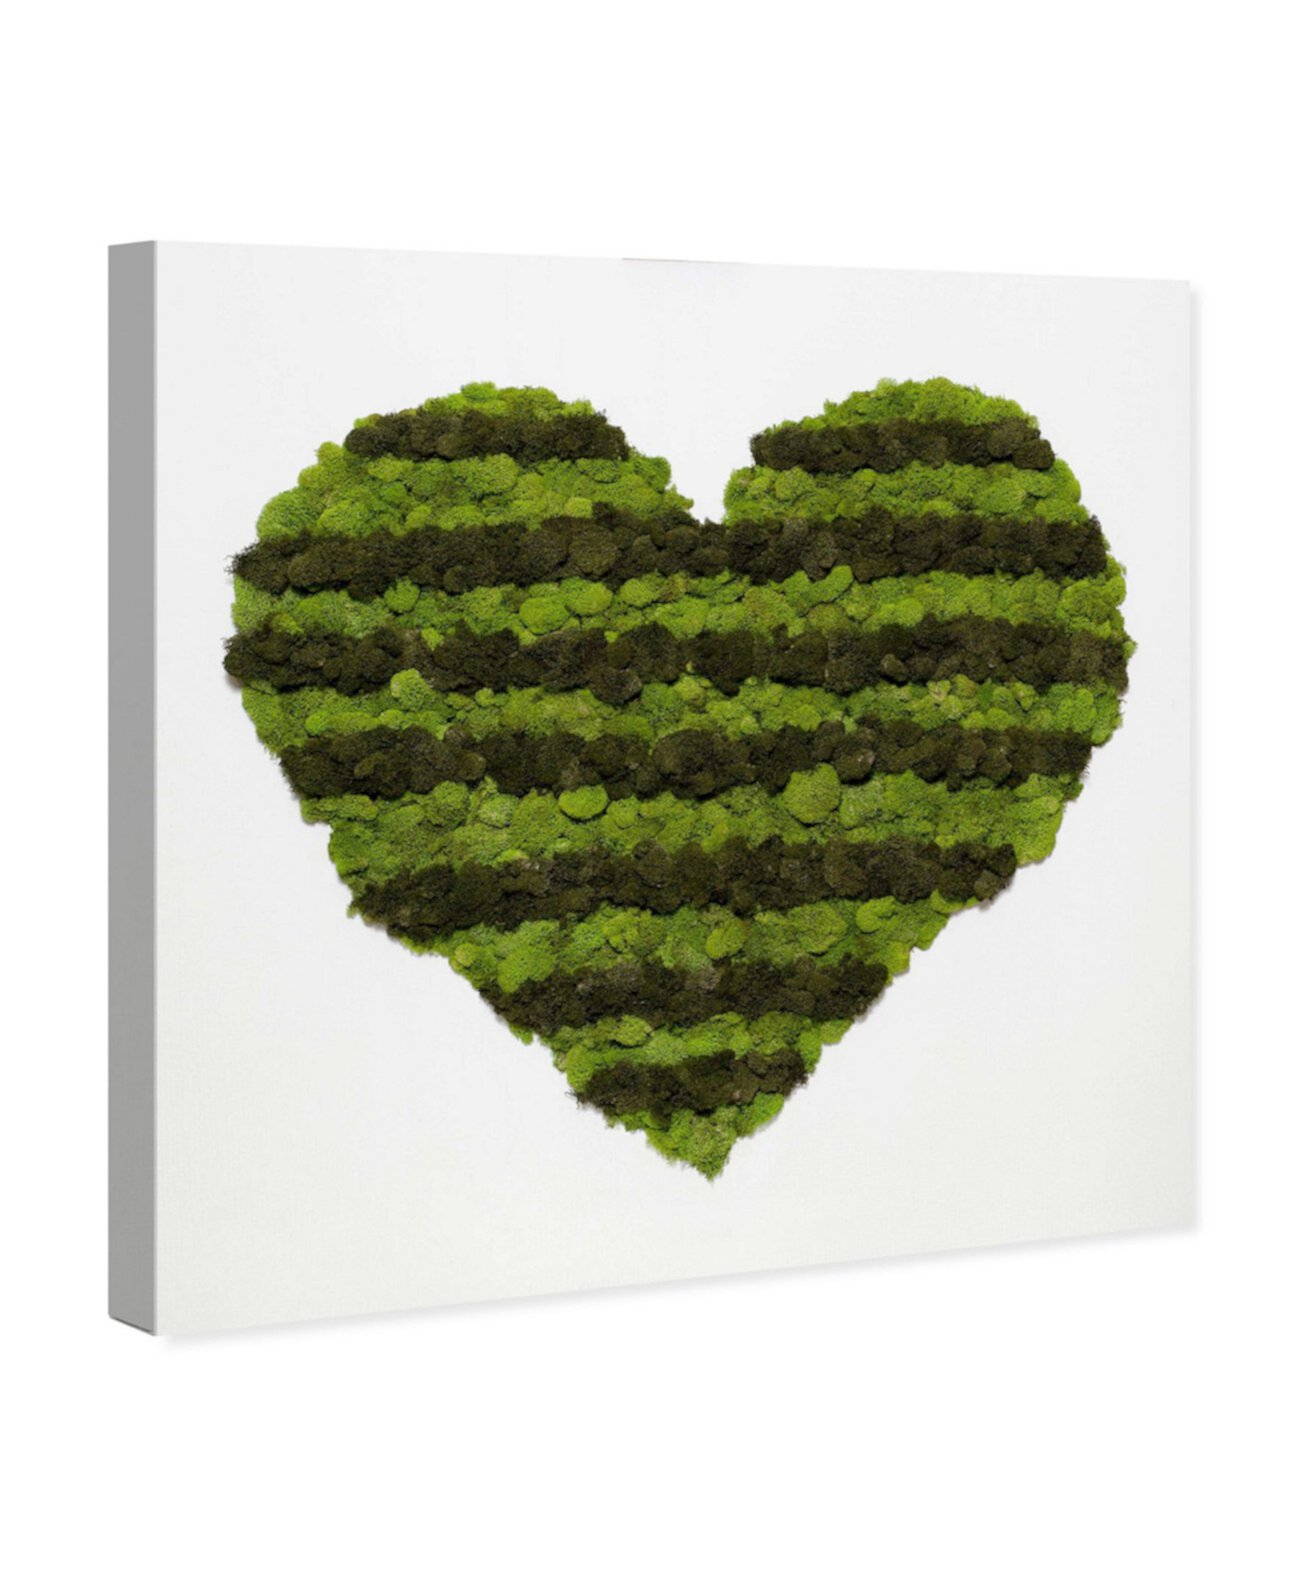 Heart of Moss Canvas Art, 43" x 43" Oliver Gal